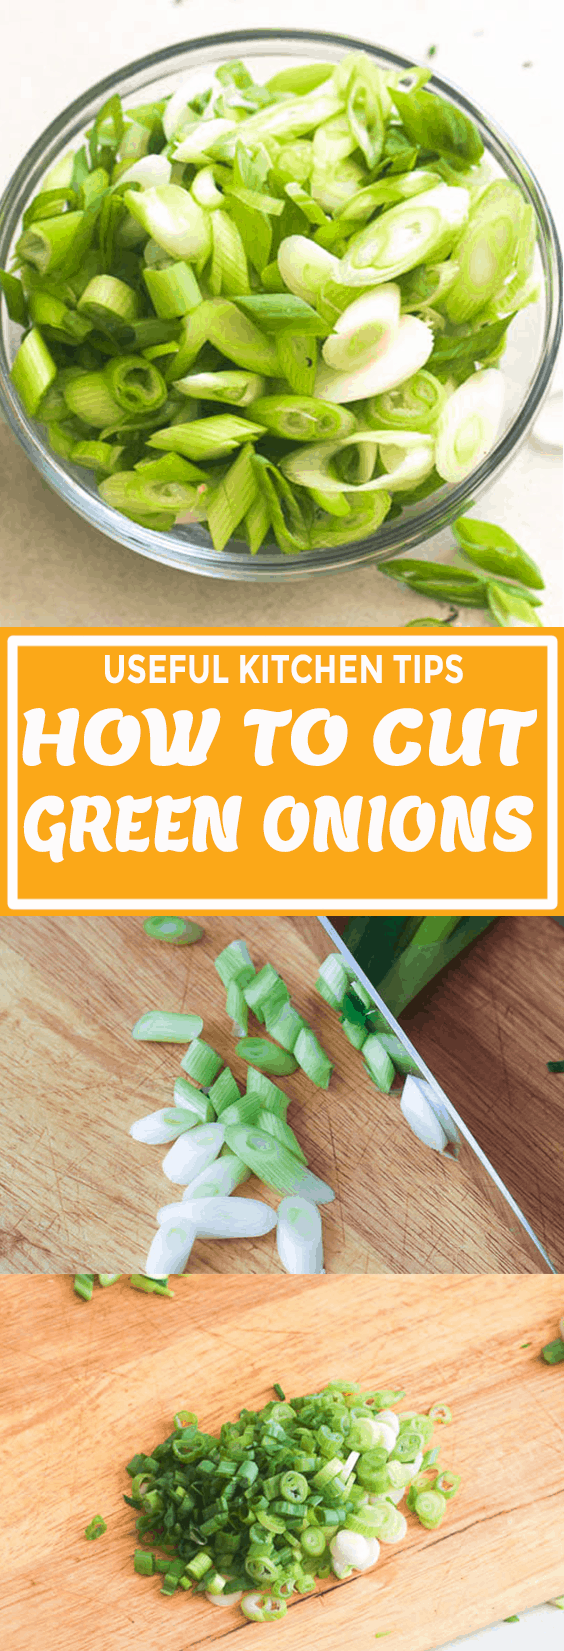 How To Cut Green Onions